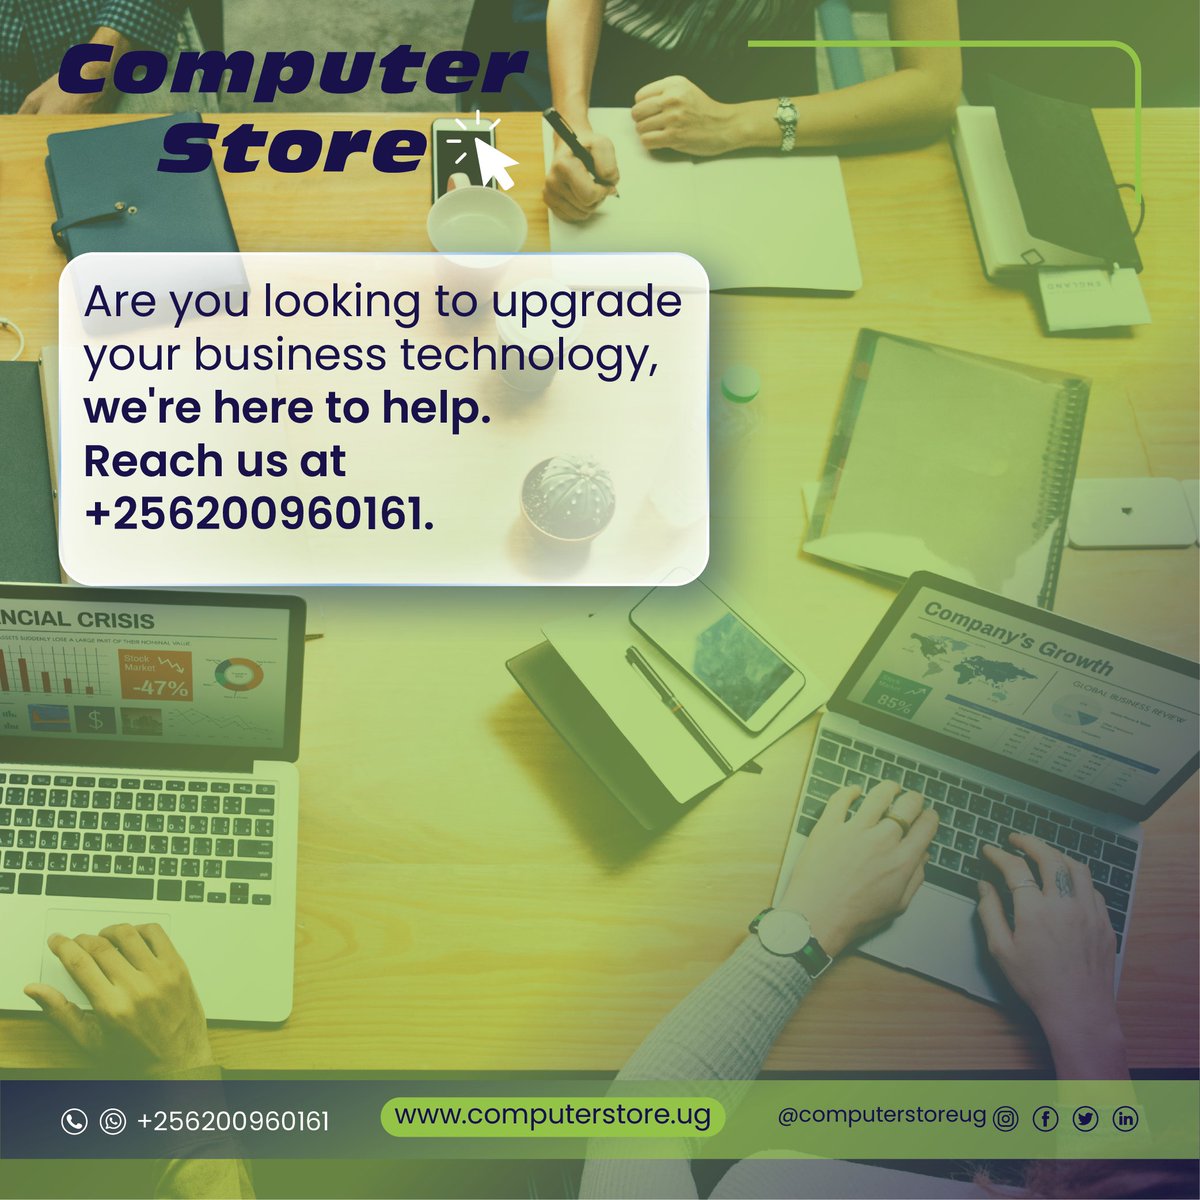 Are you looking to upgrade your technology for business expansion? Our team is here to assist with cloud computing, VoIP, and internet solutions. 

To learn more, contact us at +256200960161 or info@computerstore.ug. #NextGenerationITSolutions